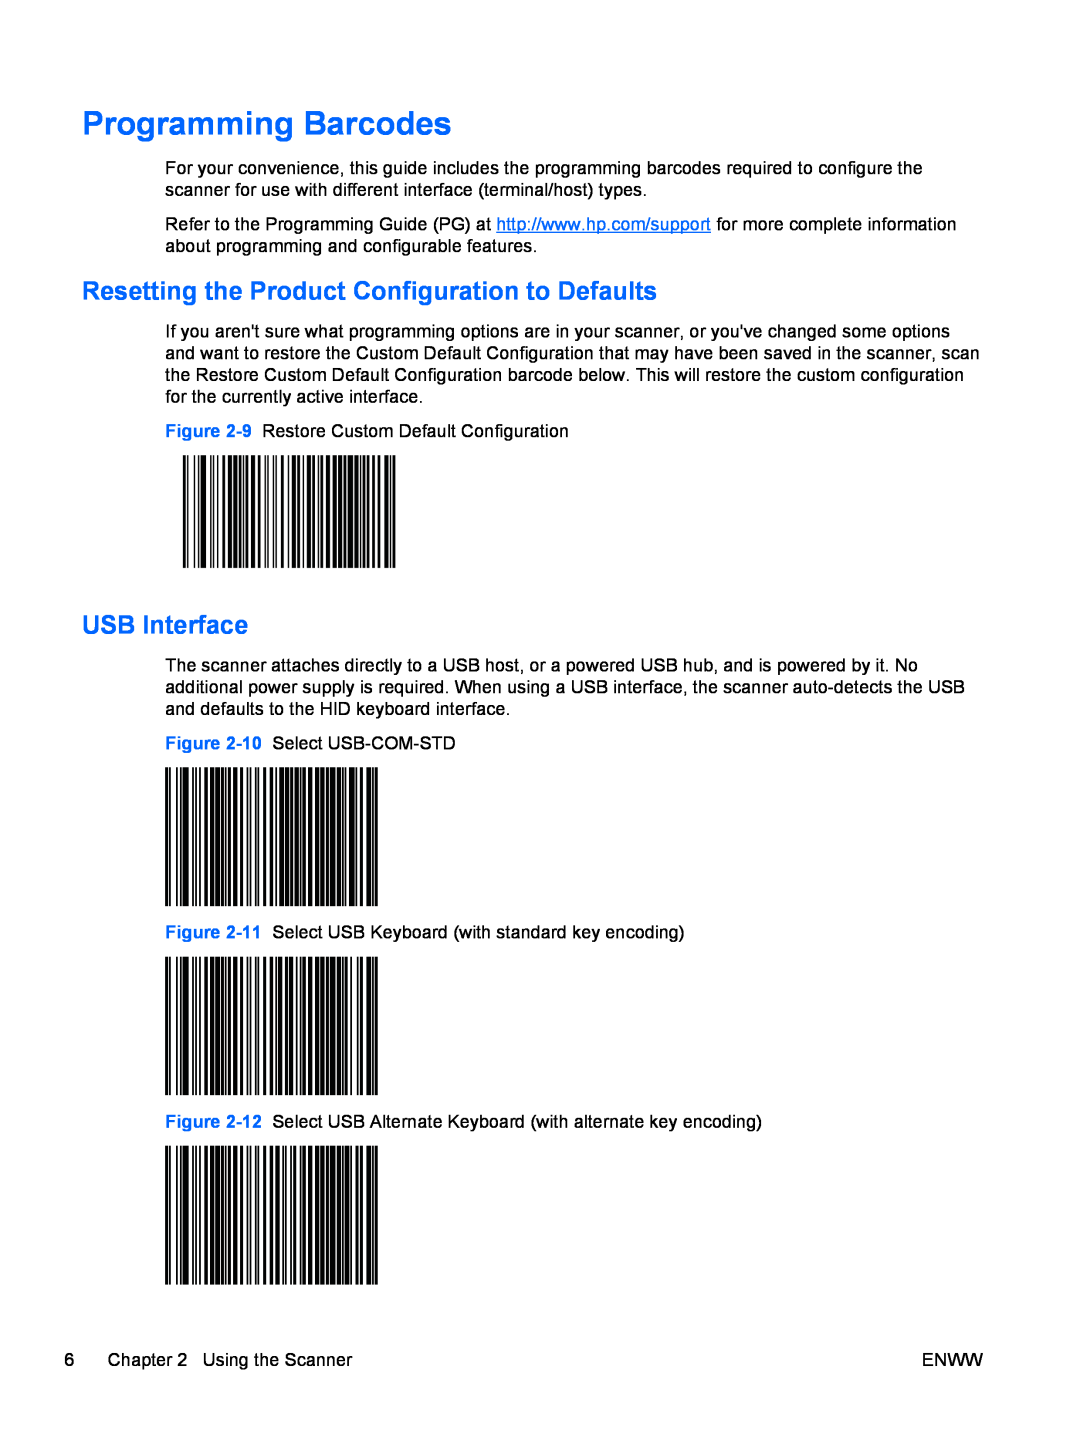 HP rp5800 Retail System manual Programming Barcodes, Resetting the Product Configuration to Defaults, USB Interface 